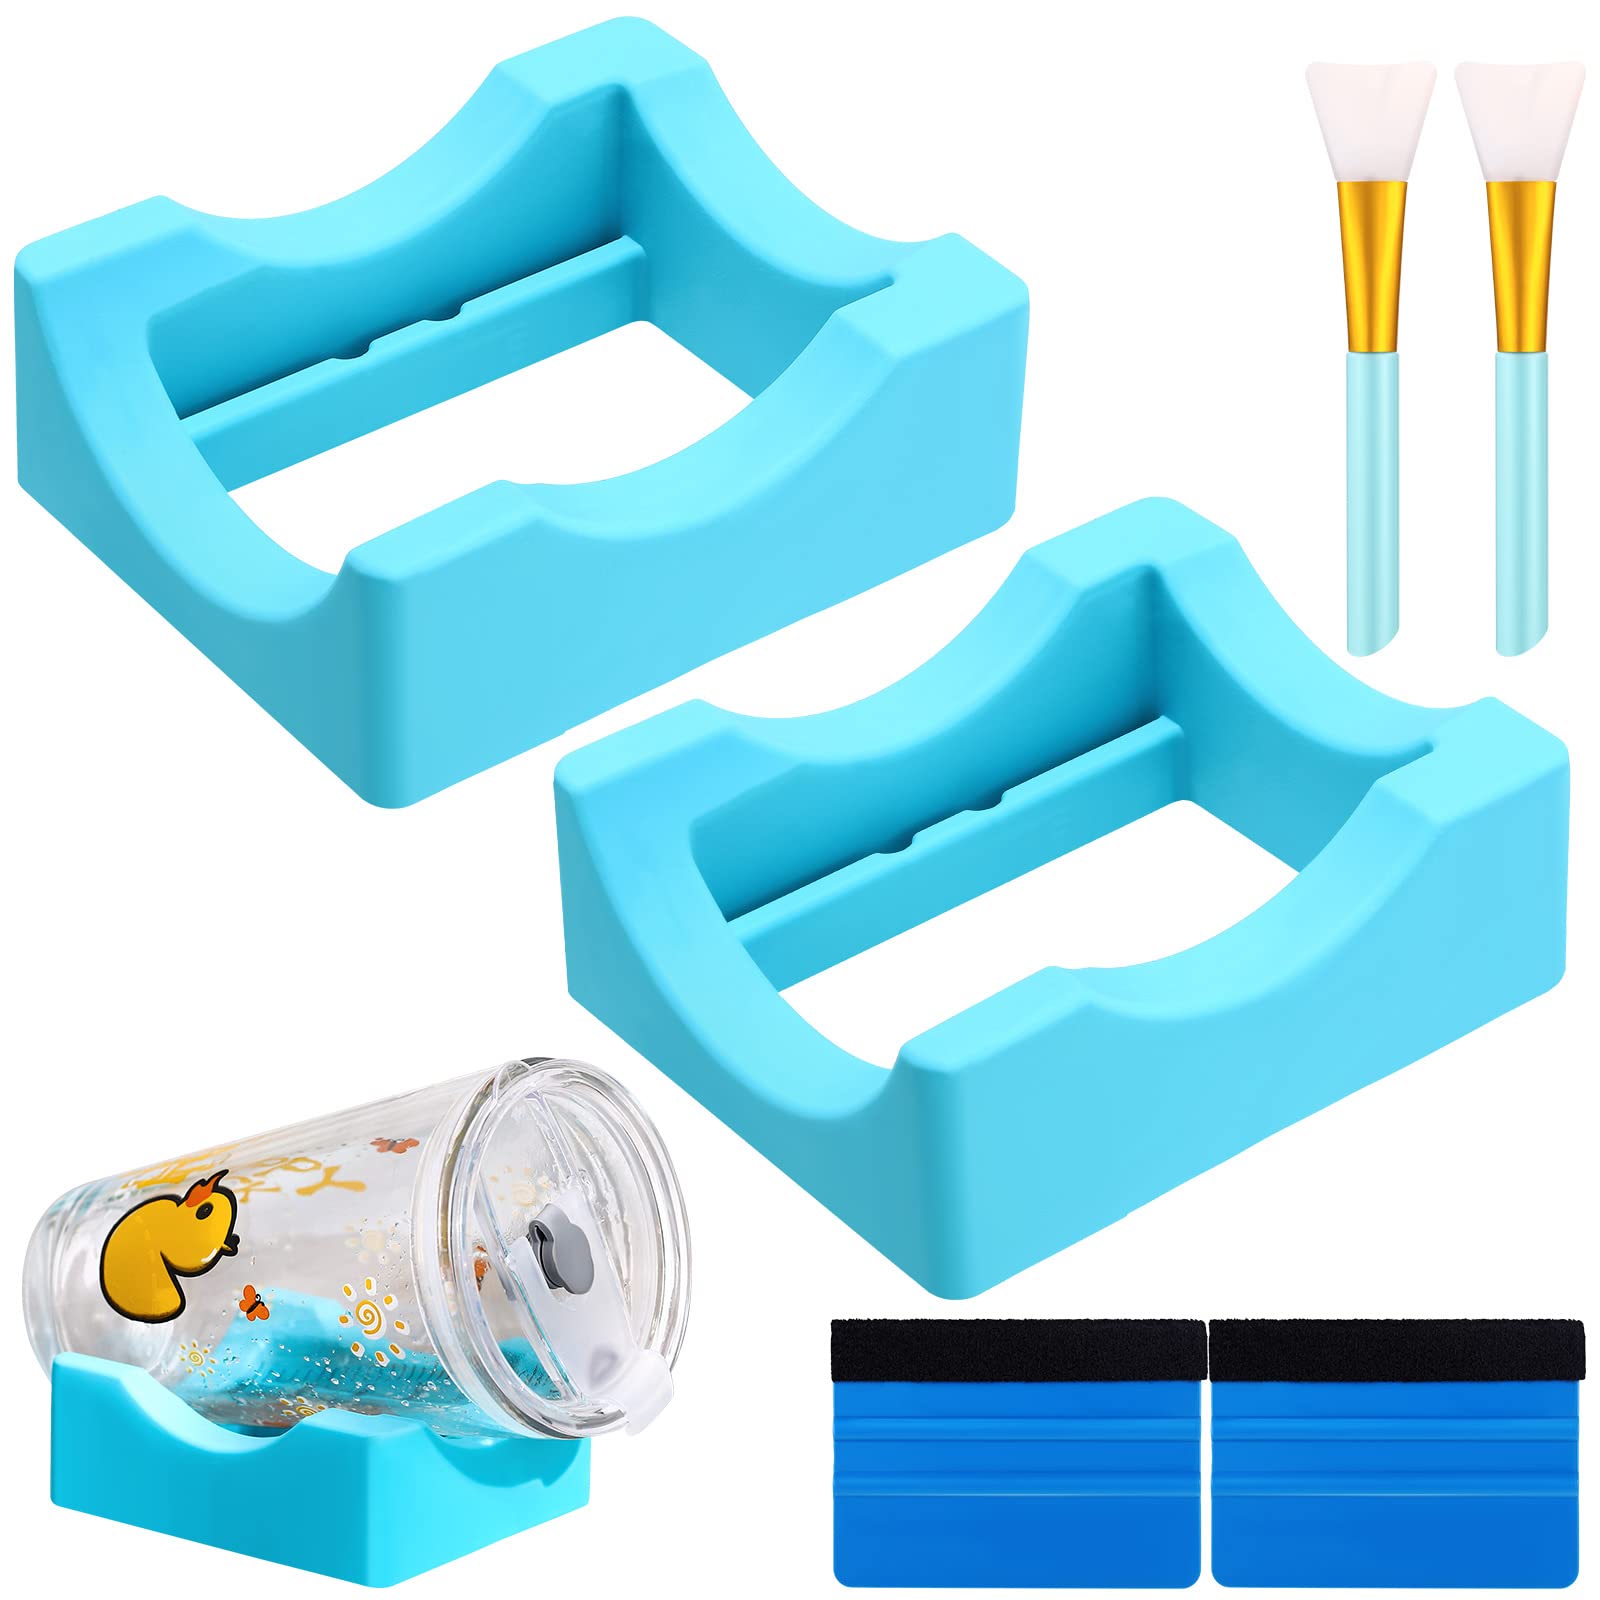 2 Pieces Silicone Cup Cradle Cup Holder with Built in Slot 2 Pieces Felt  Edge Squeegee with 2 Silicone Brush for Crafting Tumblers Vinyl Decals  Crafts Epoxy Bottles